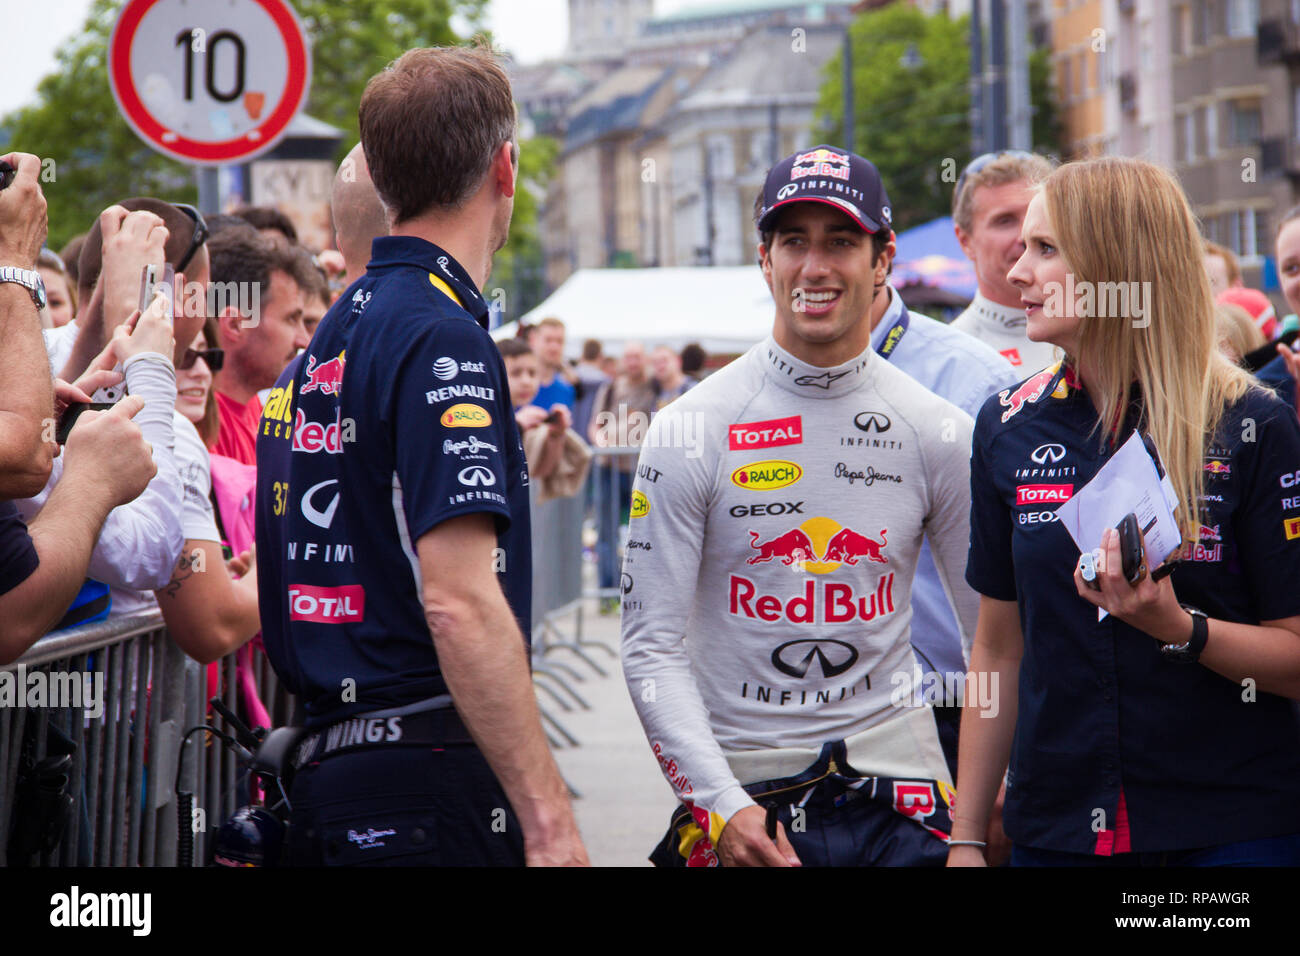 F1 Daniel Ricciardo and David Coulthard /Archive Street, AD photos, Red Bull,  Infiniti, Pepe Jeans, Rauch, Geox, Renault, Total/ 2014 Budapest, Hungary  Stock Photo - Alamy